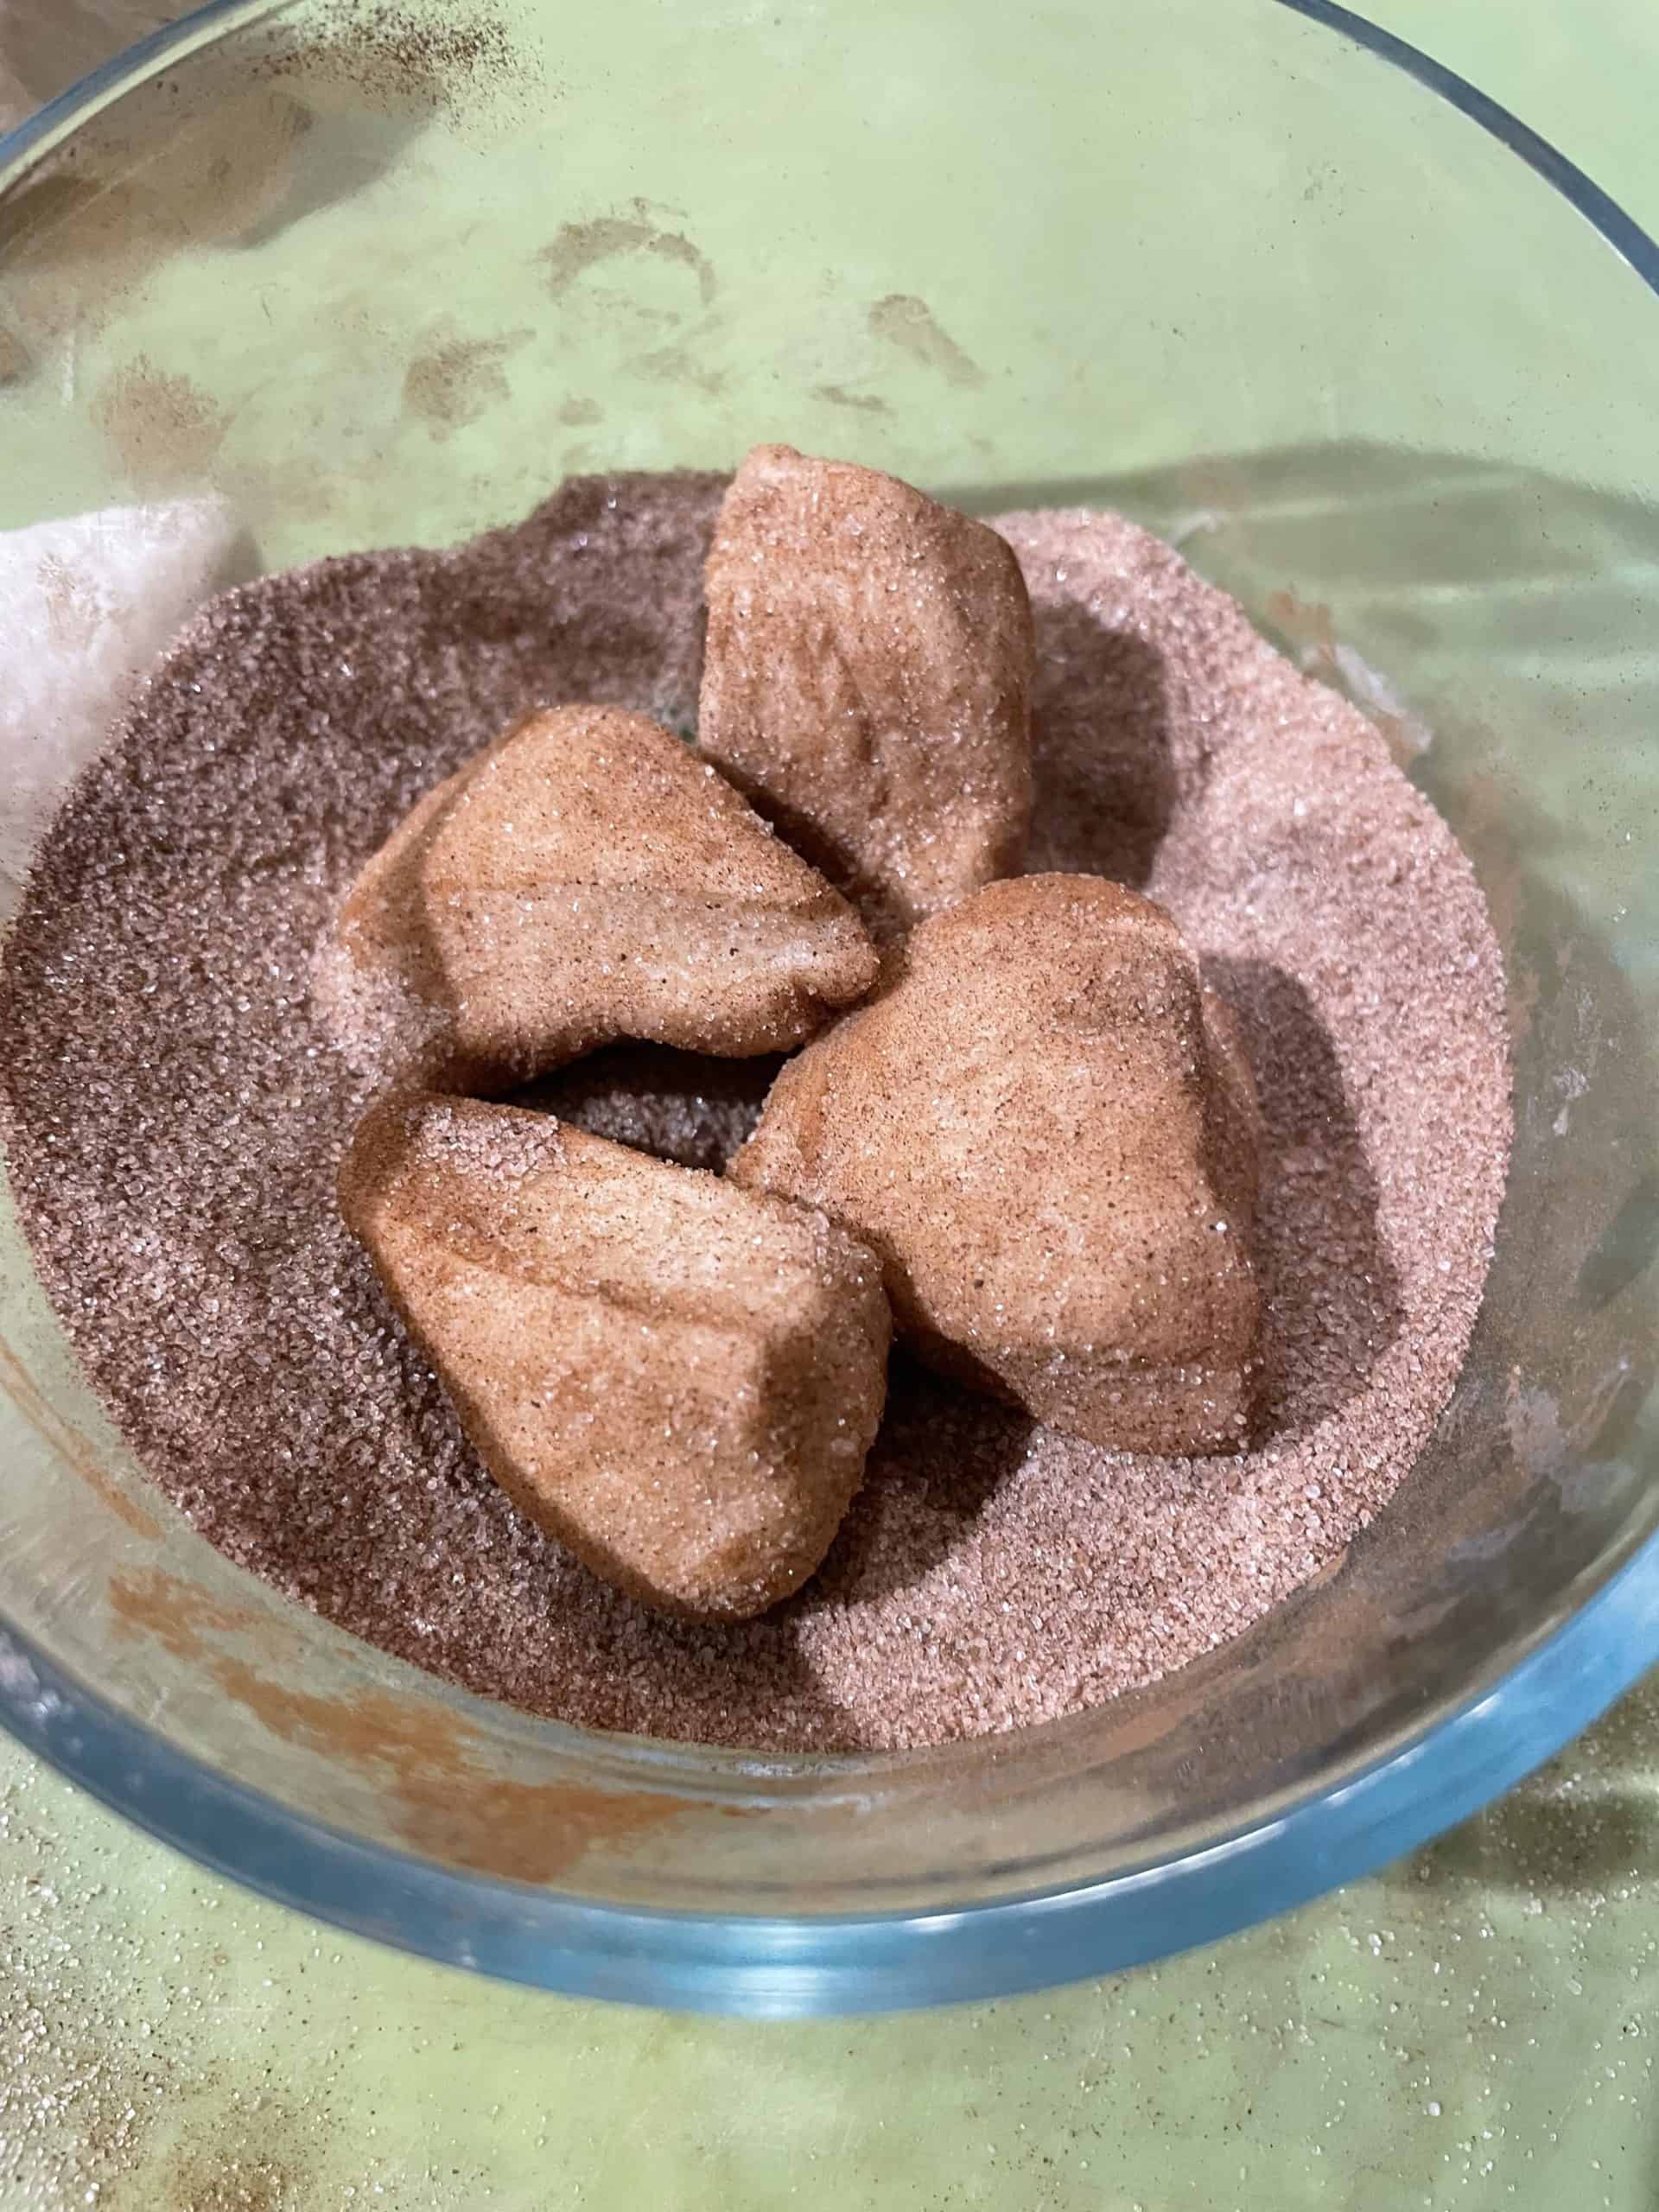 Cinnamon Sugar coated biscuits in a bowl.